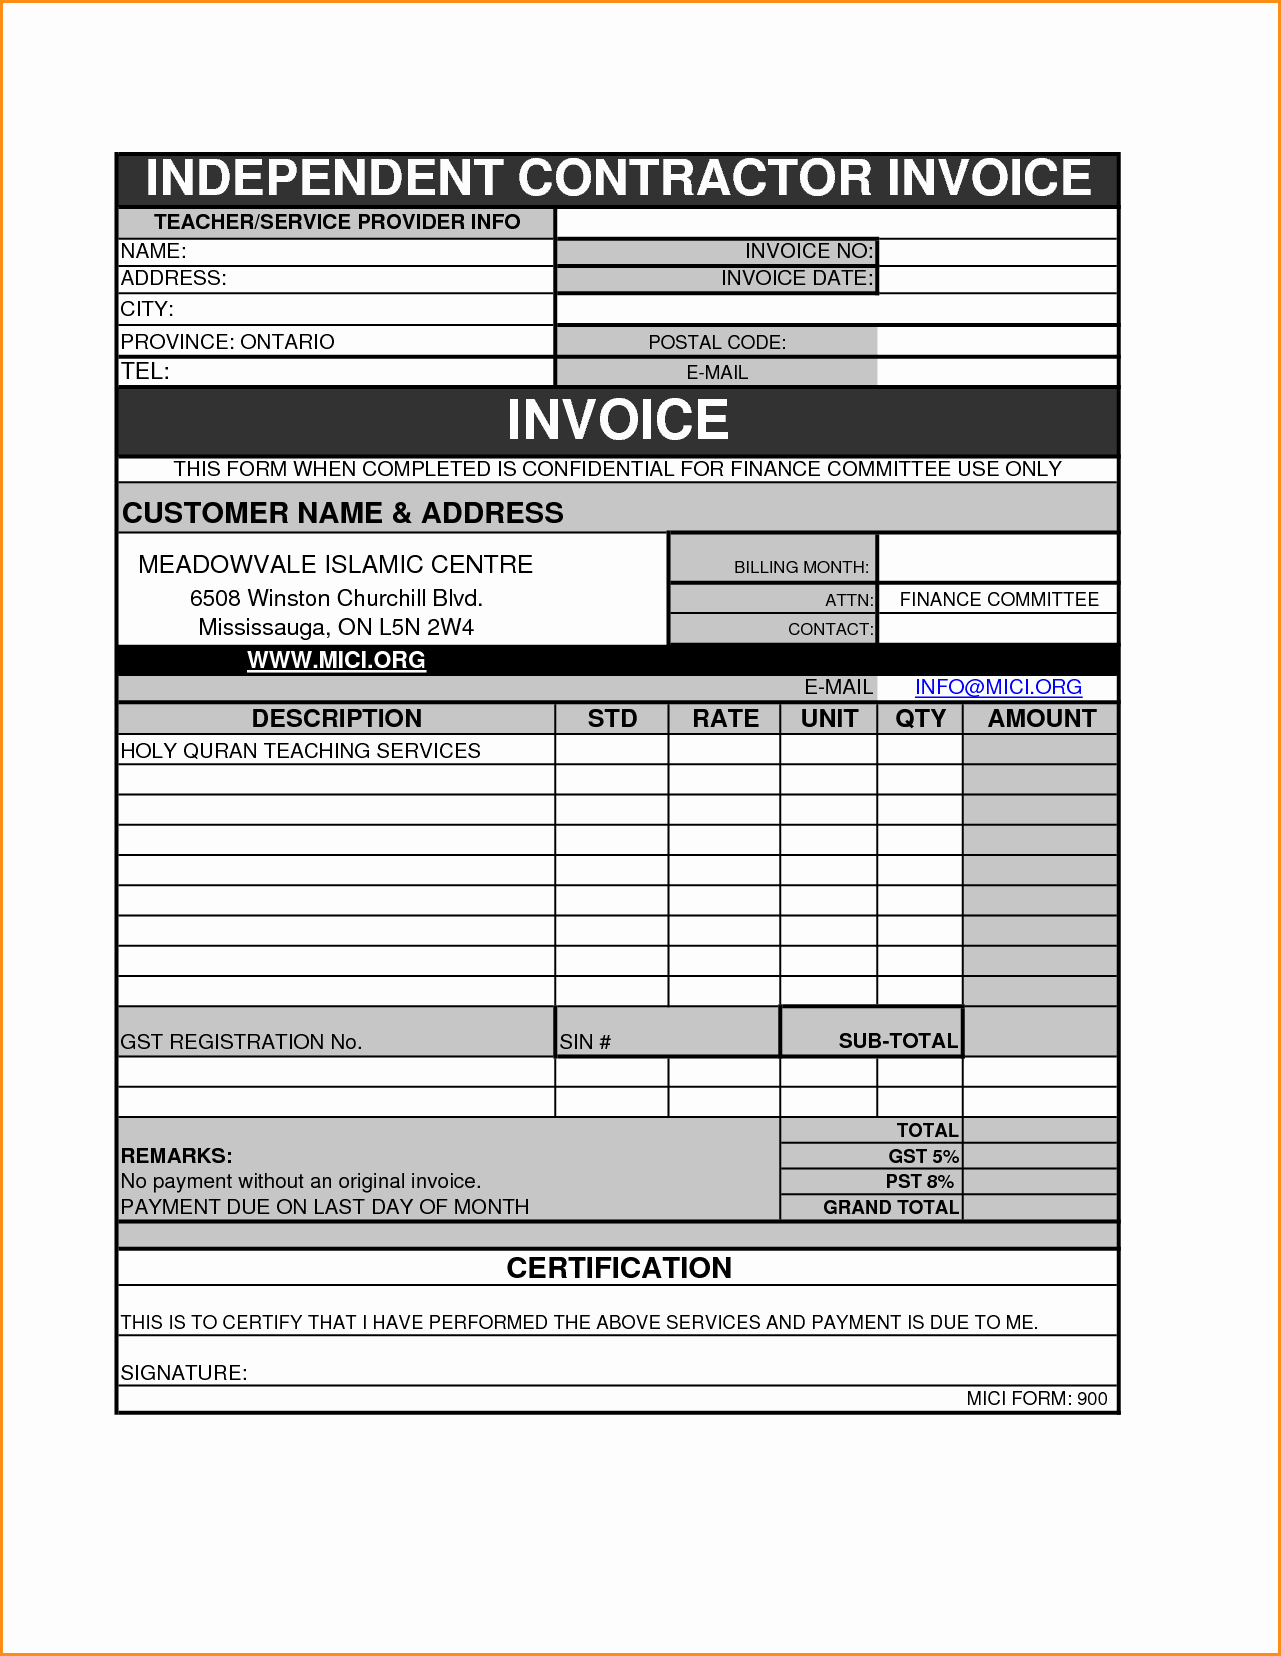 11 Independent Contractor Invoice Template